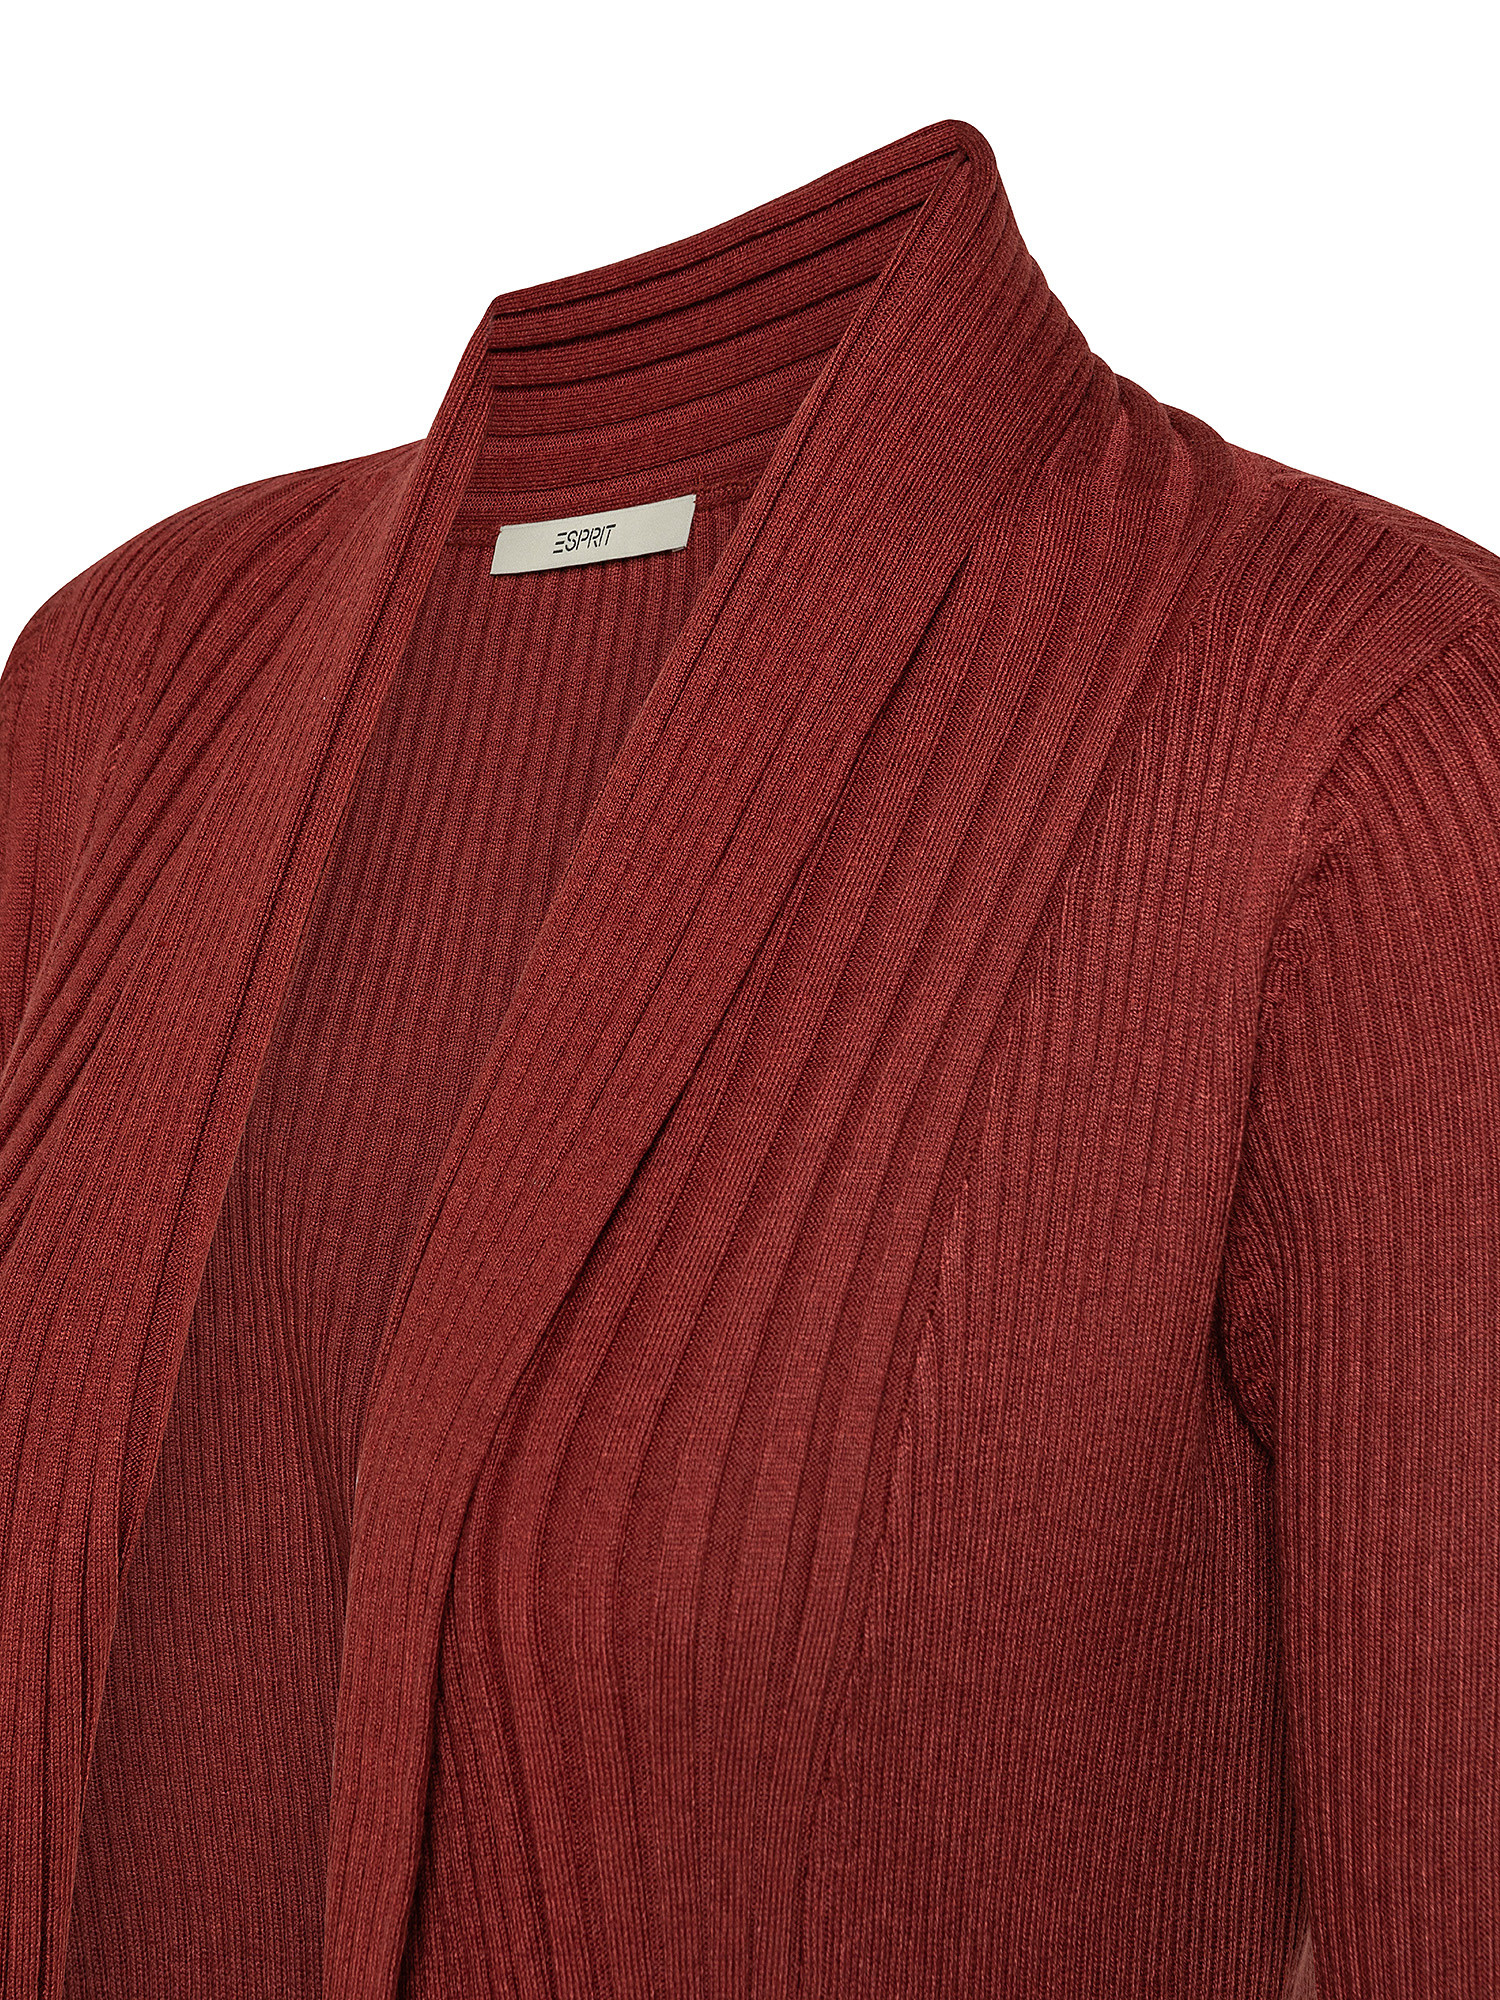 Open ribbed cardigan, Brick Red, large image number 2